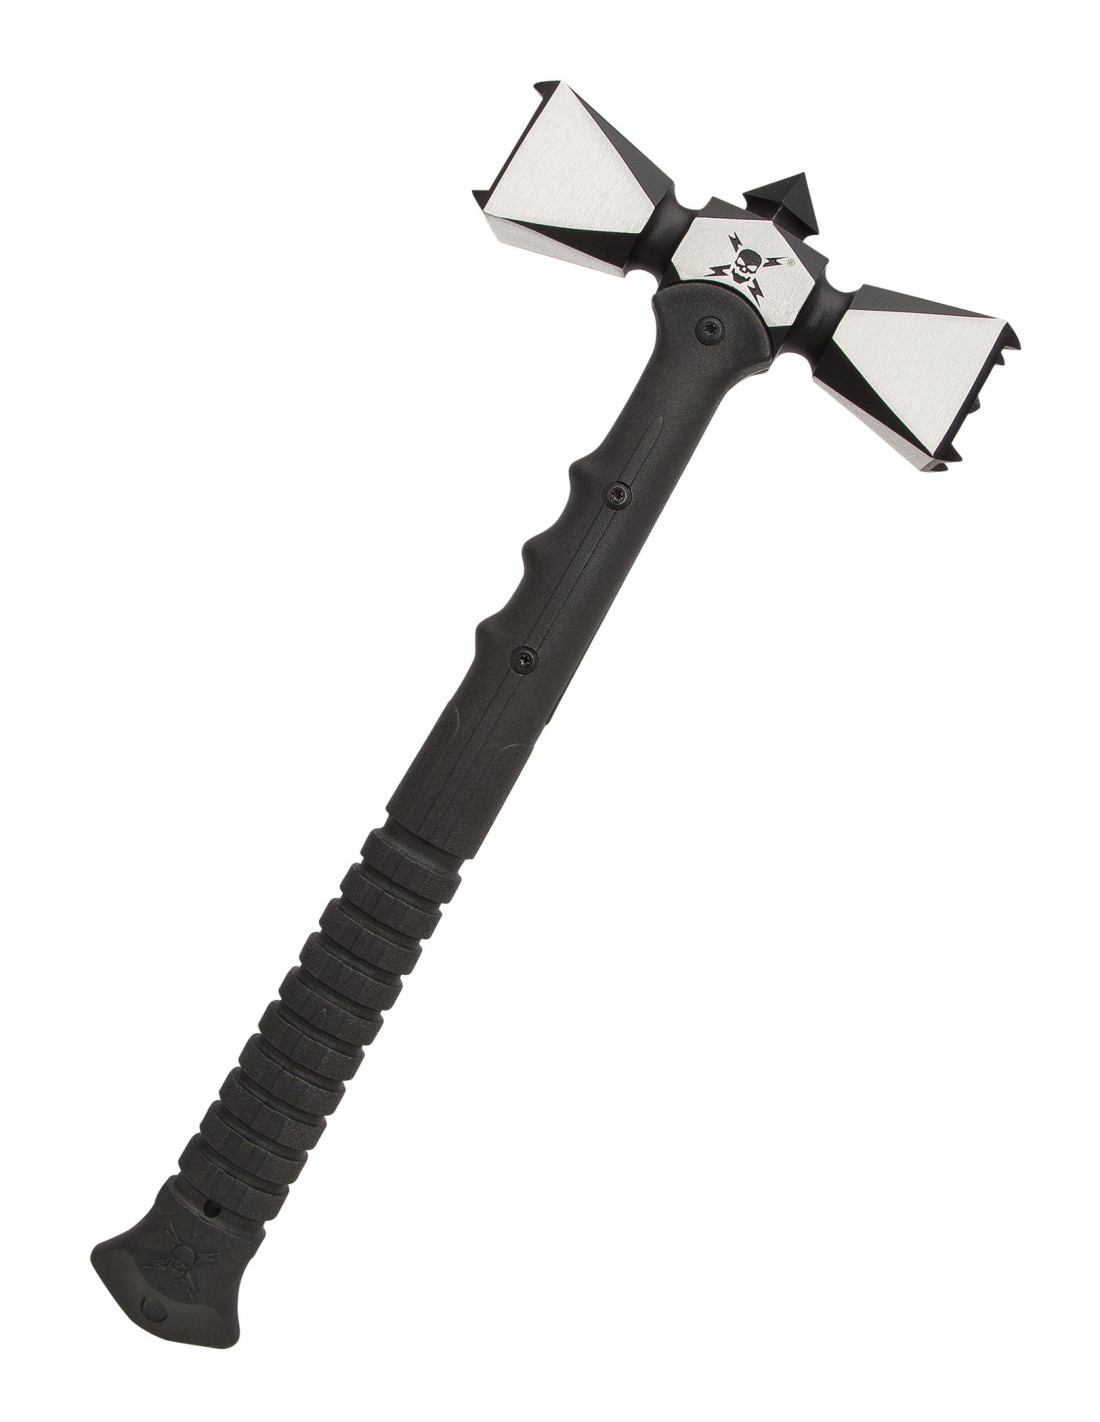 M48 Double Headed War Hammer ⚔️ Medieval Shop